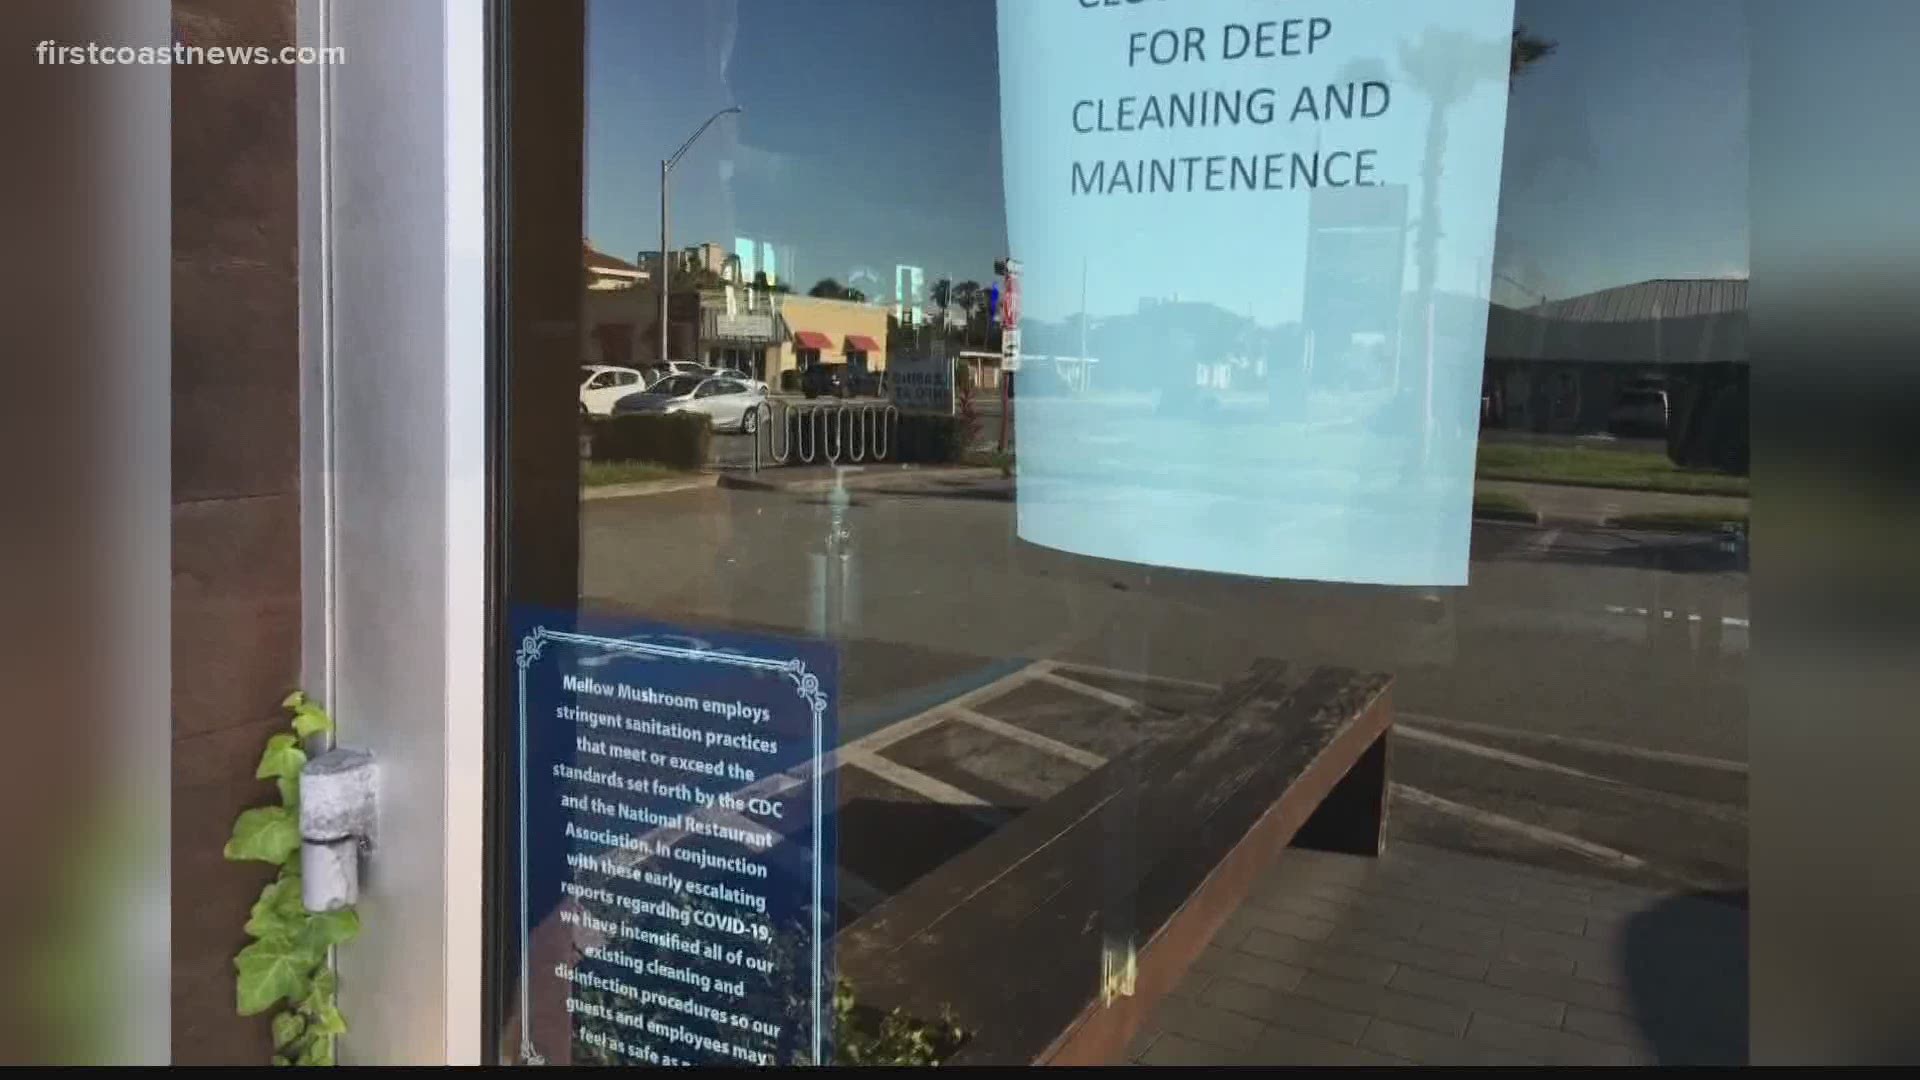 V Pizza staff say they are receptive to the city’s code enforcement agents making sure businesses are following the state’s reopening guidelines.